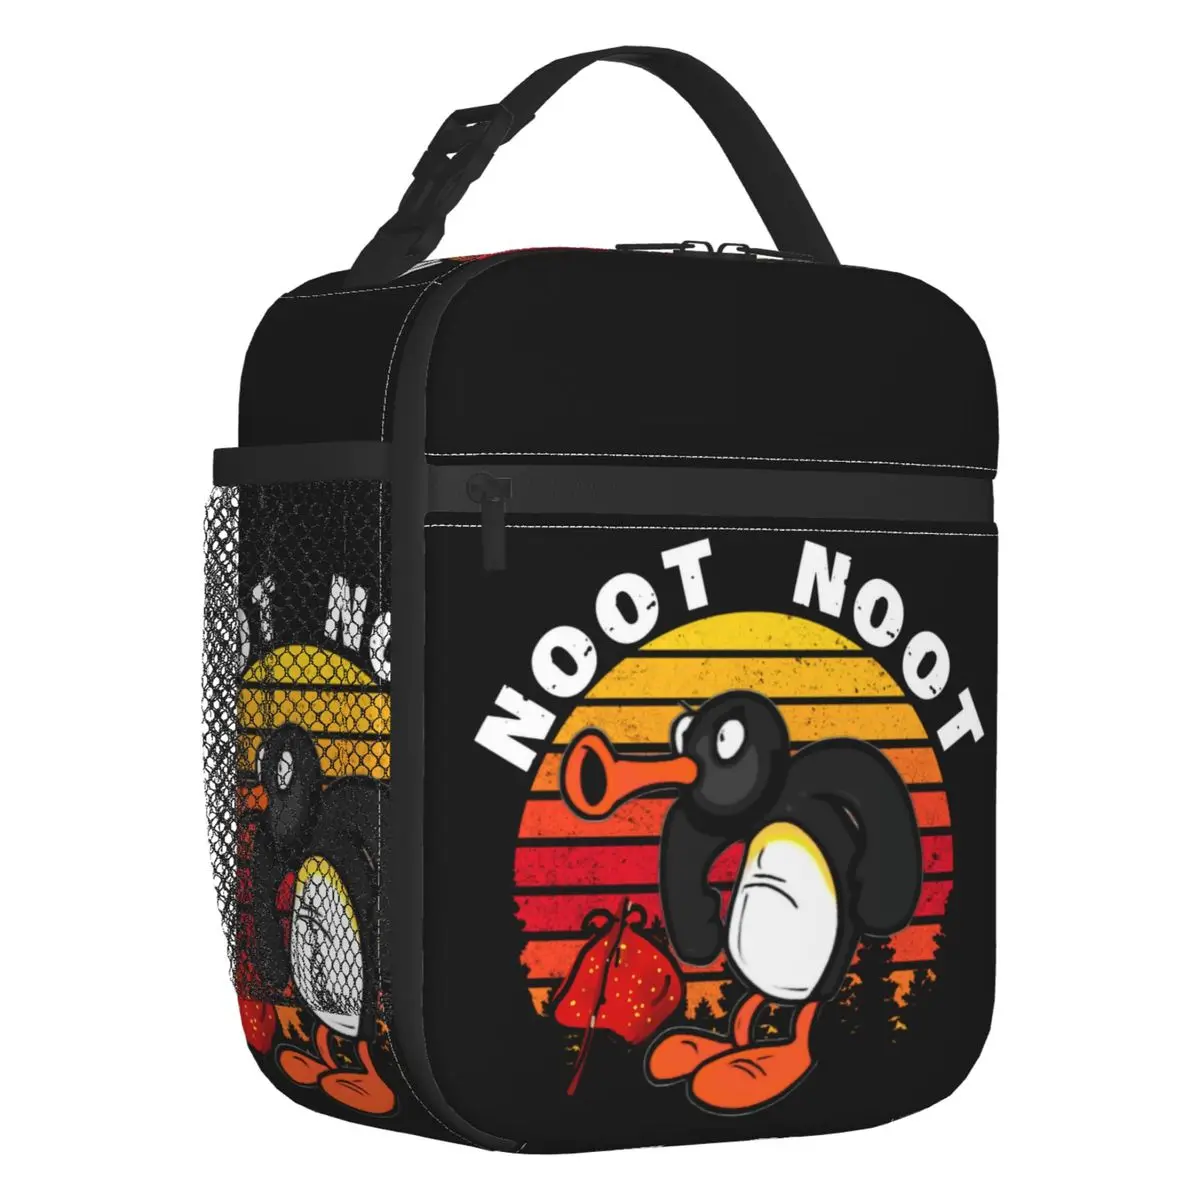 

Noot Noot Pingu Funny Portable Lunch Box Multifunction Ulzzang Thermal Cooler Food Insulated Lunch Bag Kids School Children